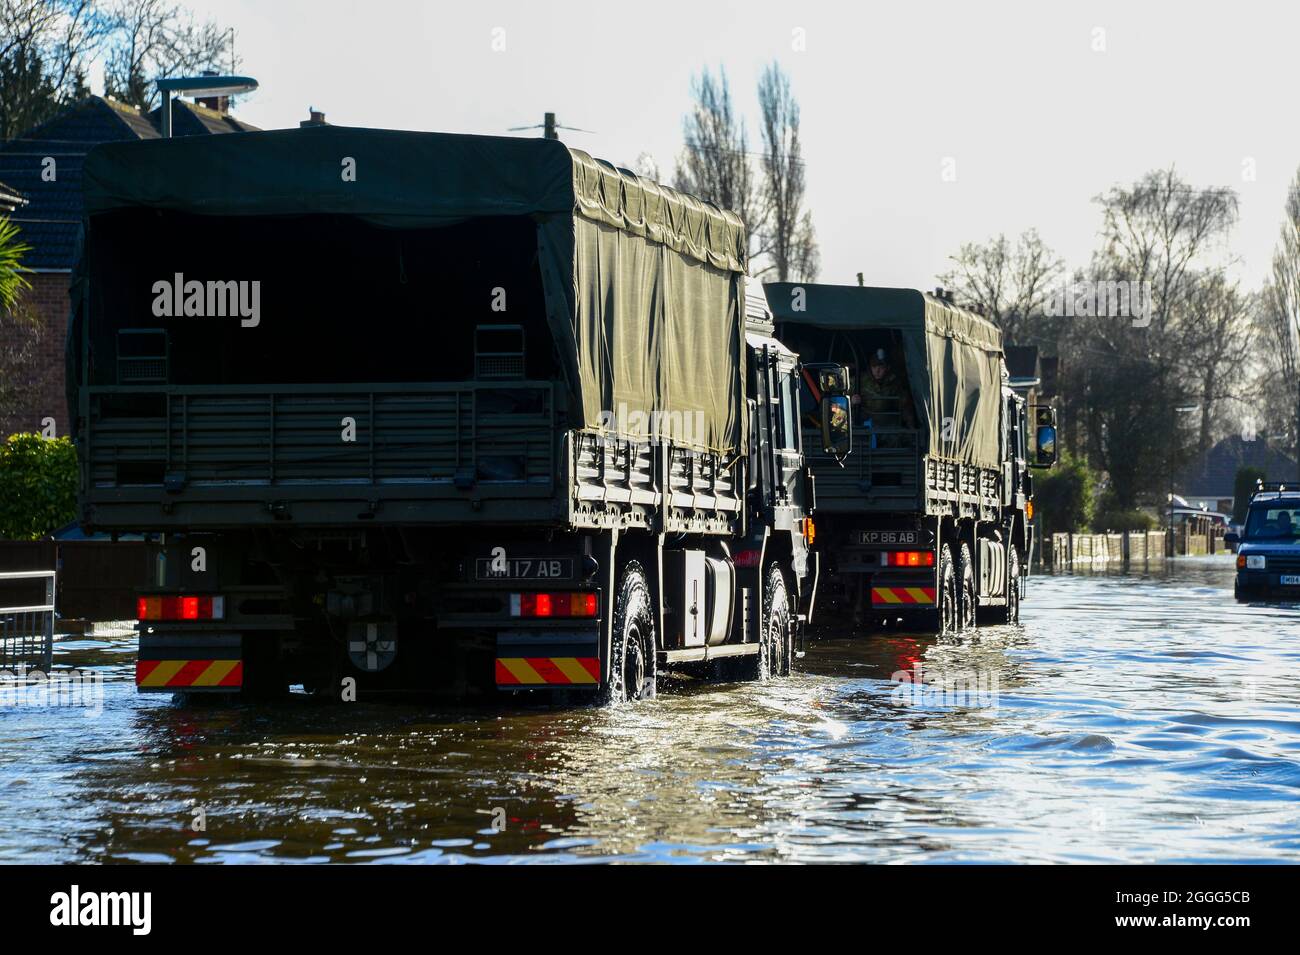 The British Army give aid to residents in flood stricken Chertsey. Providing sandbags and aid where needed Stock Photo